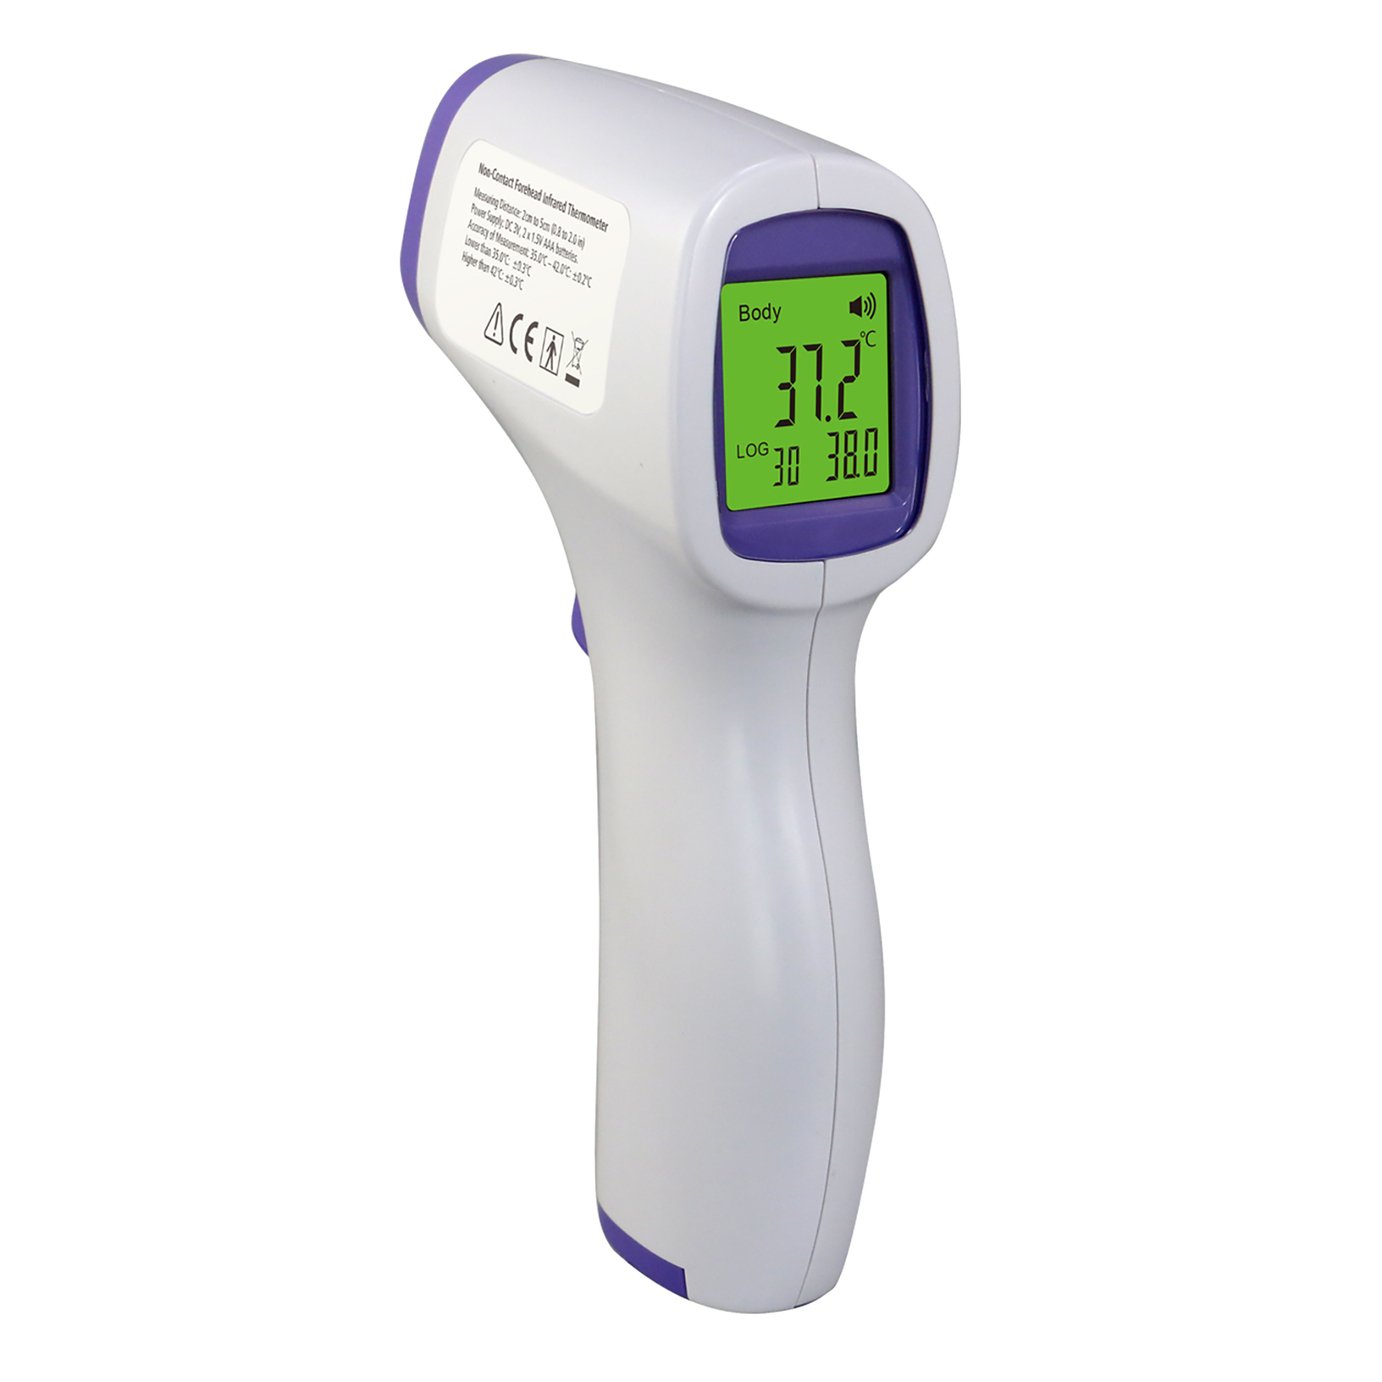 Jabees JBT1 None Contact Thermometer Review